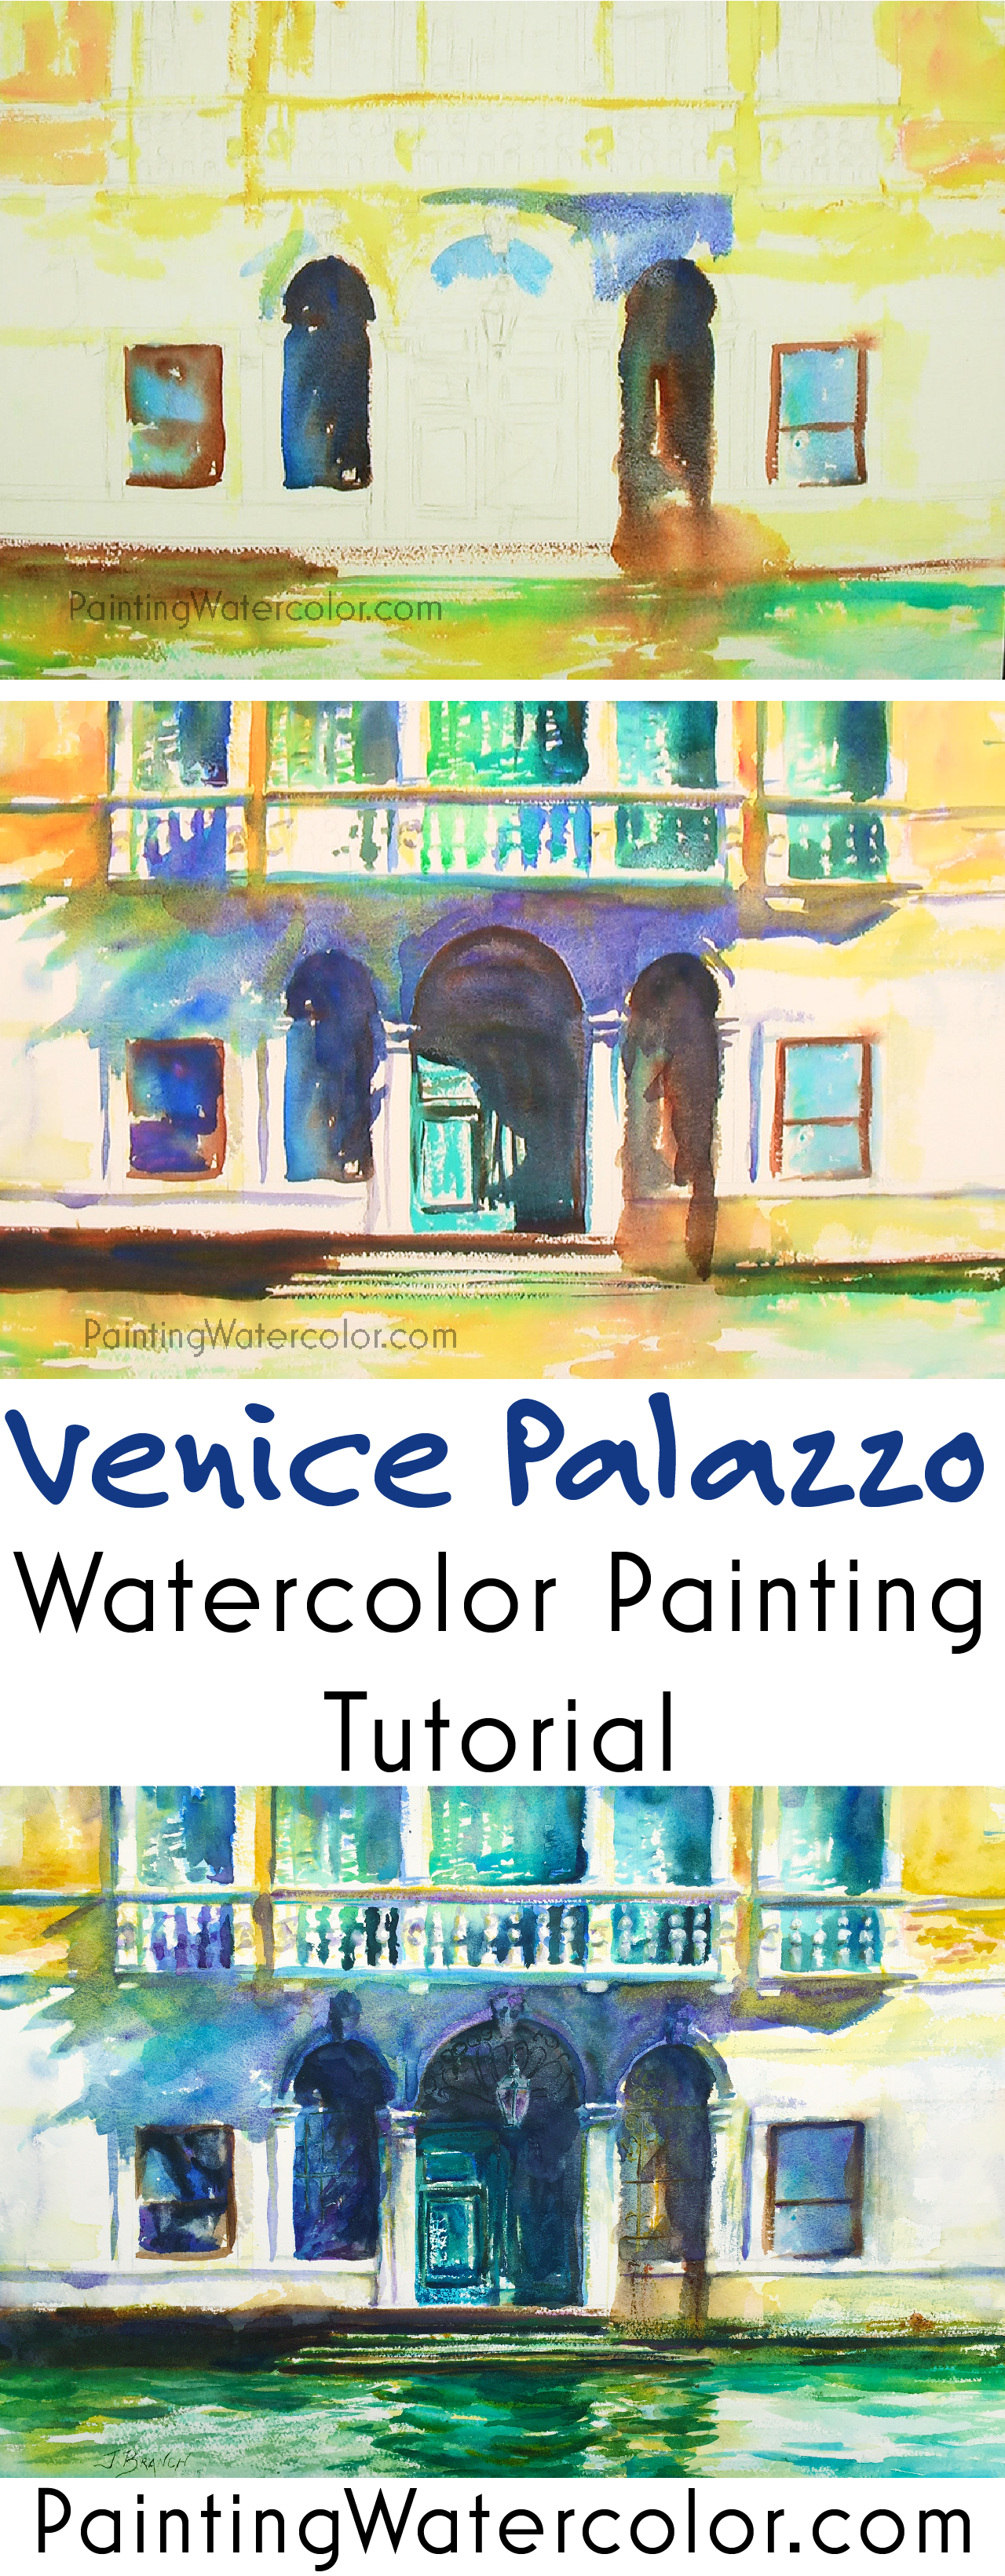 Venice Palazzo watercolor painting tutorial by Jennifer Branch